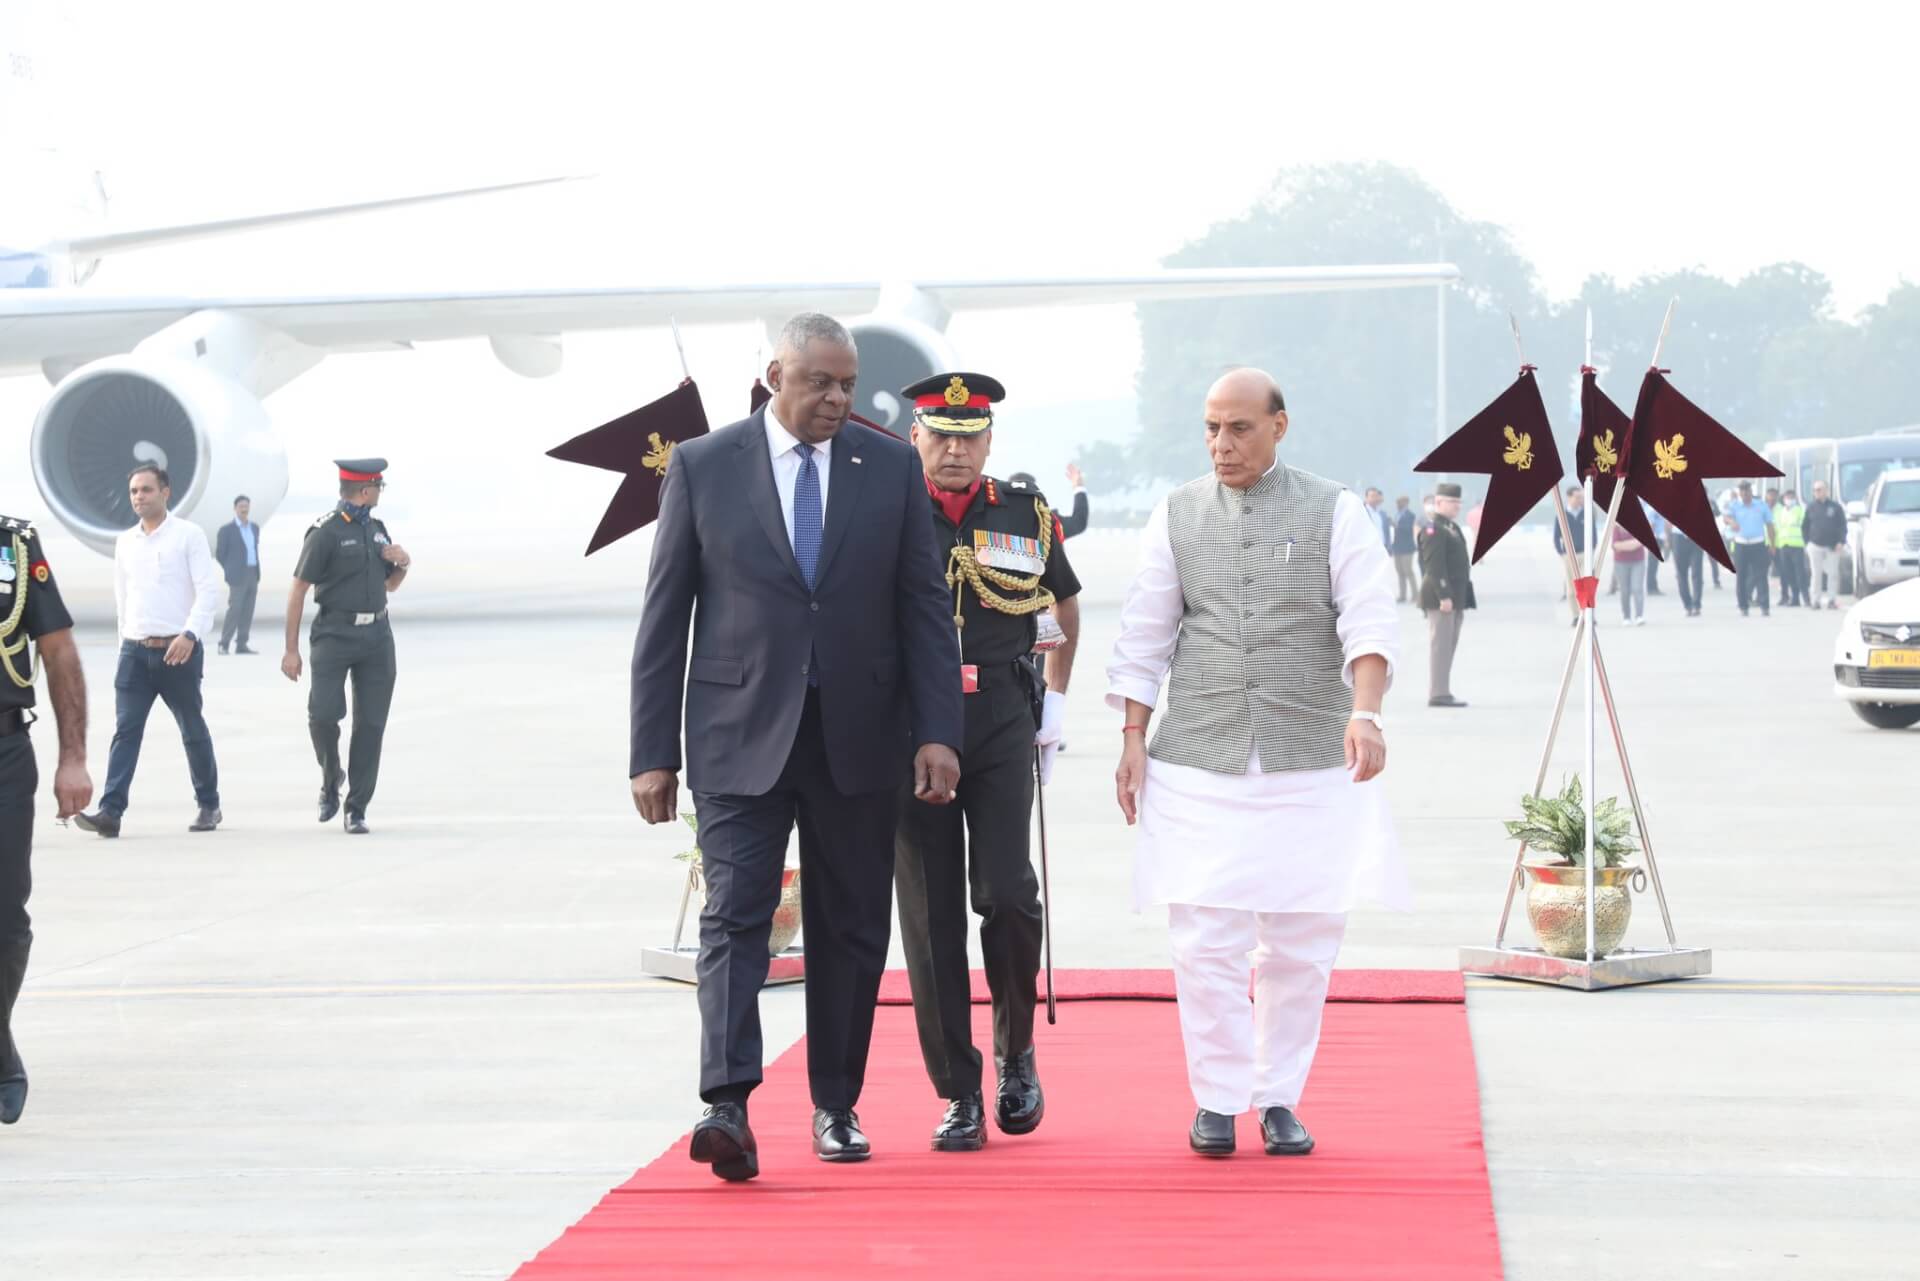 Def Sec Austin Arrives in New Delhi to Participate in US-India ‘2+2’ Ministerial Meet